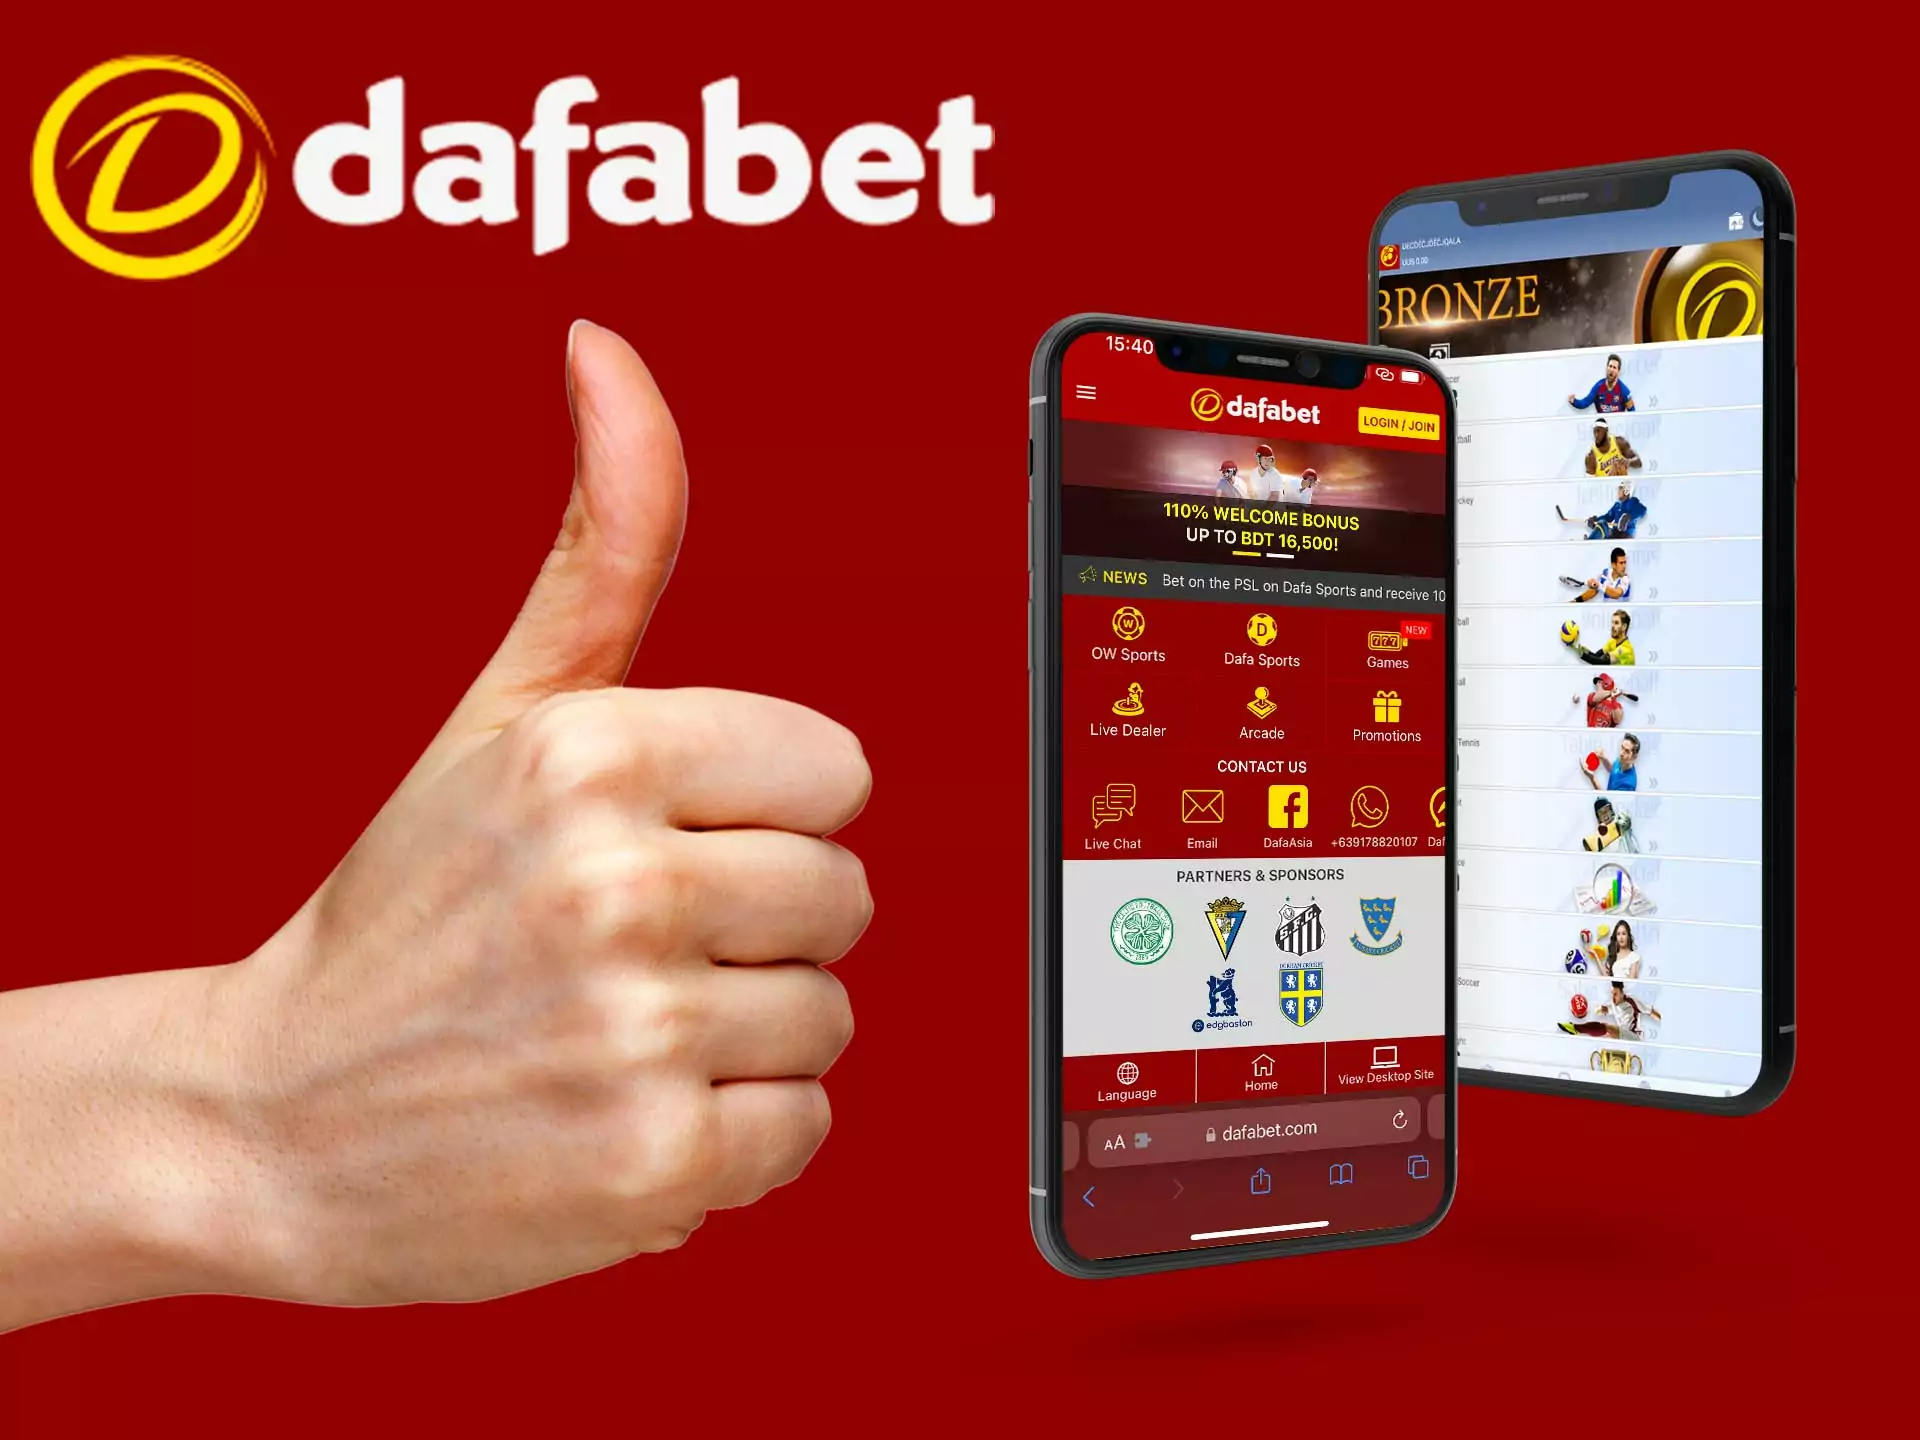 3 Tips About where to upload pan card details in dafabet You Can't Afford To Miss